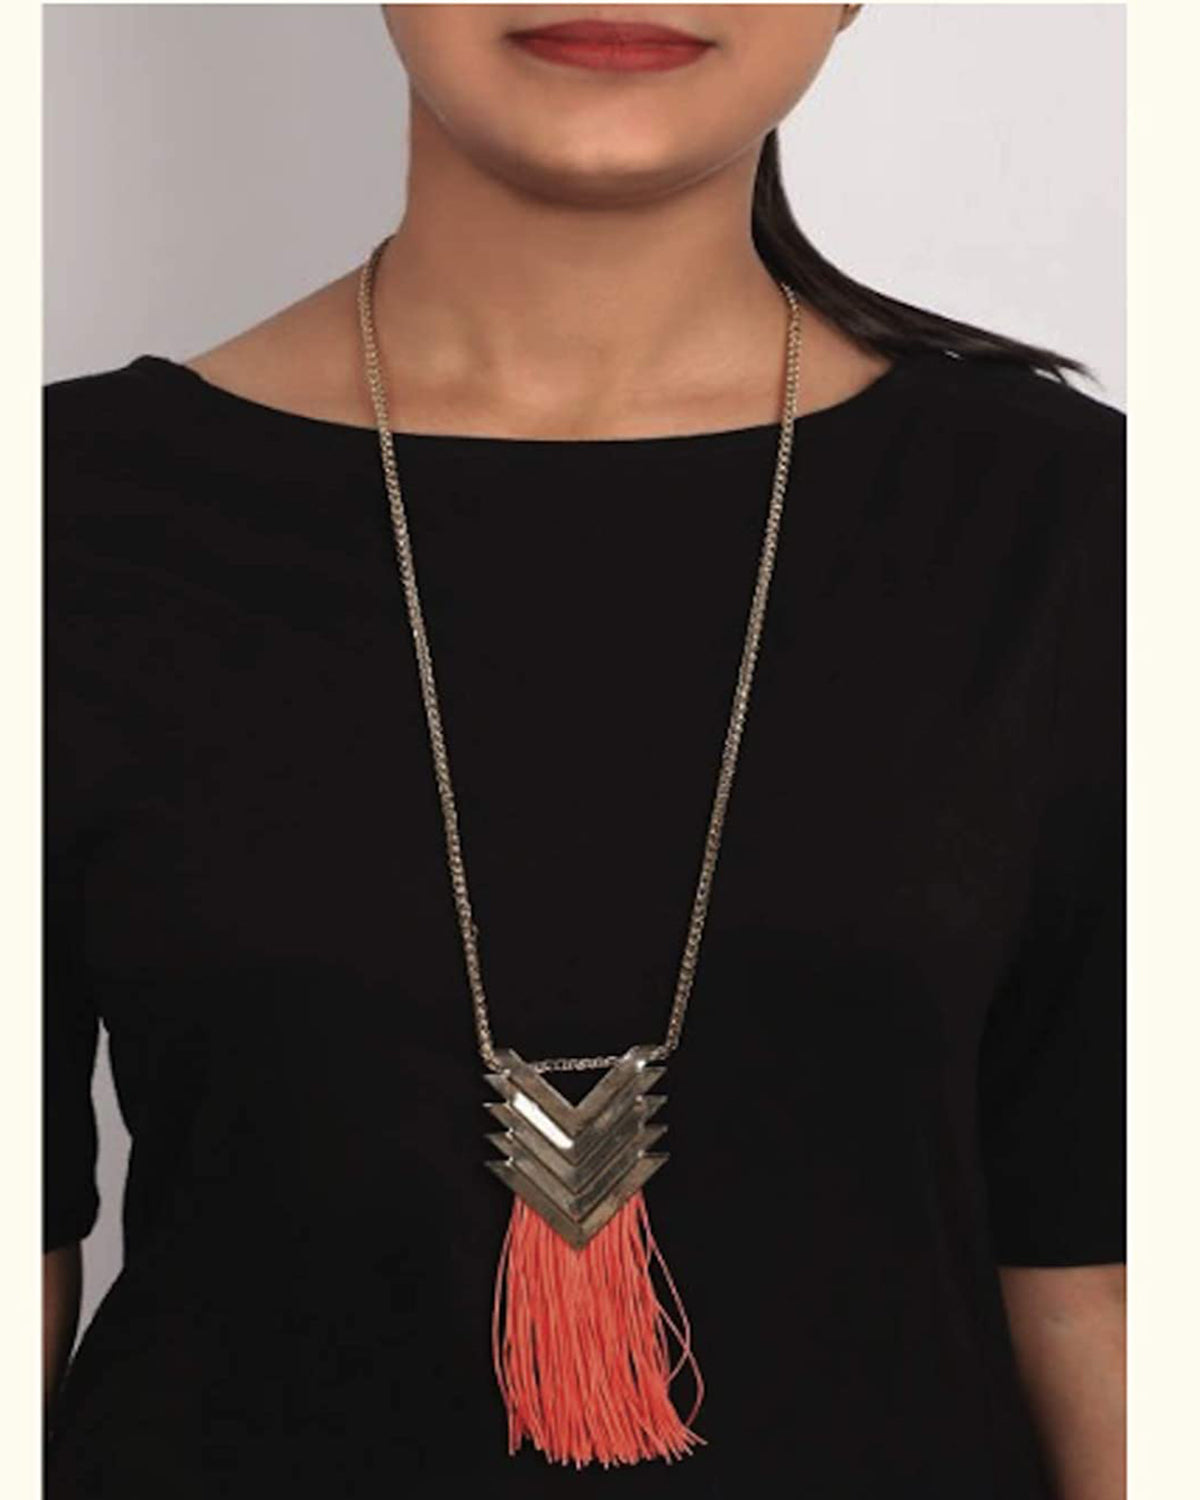 Grey Arrow Design Pendant Necklace with Hanging Tassels Jewellery for Women - Coral Tree 